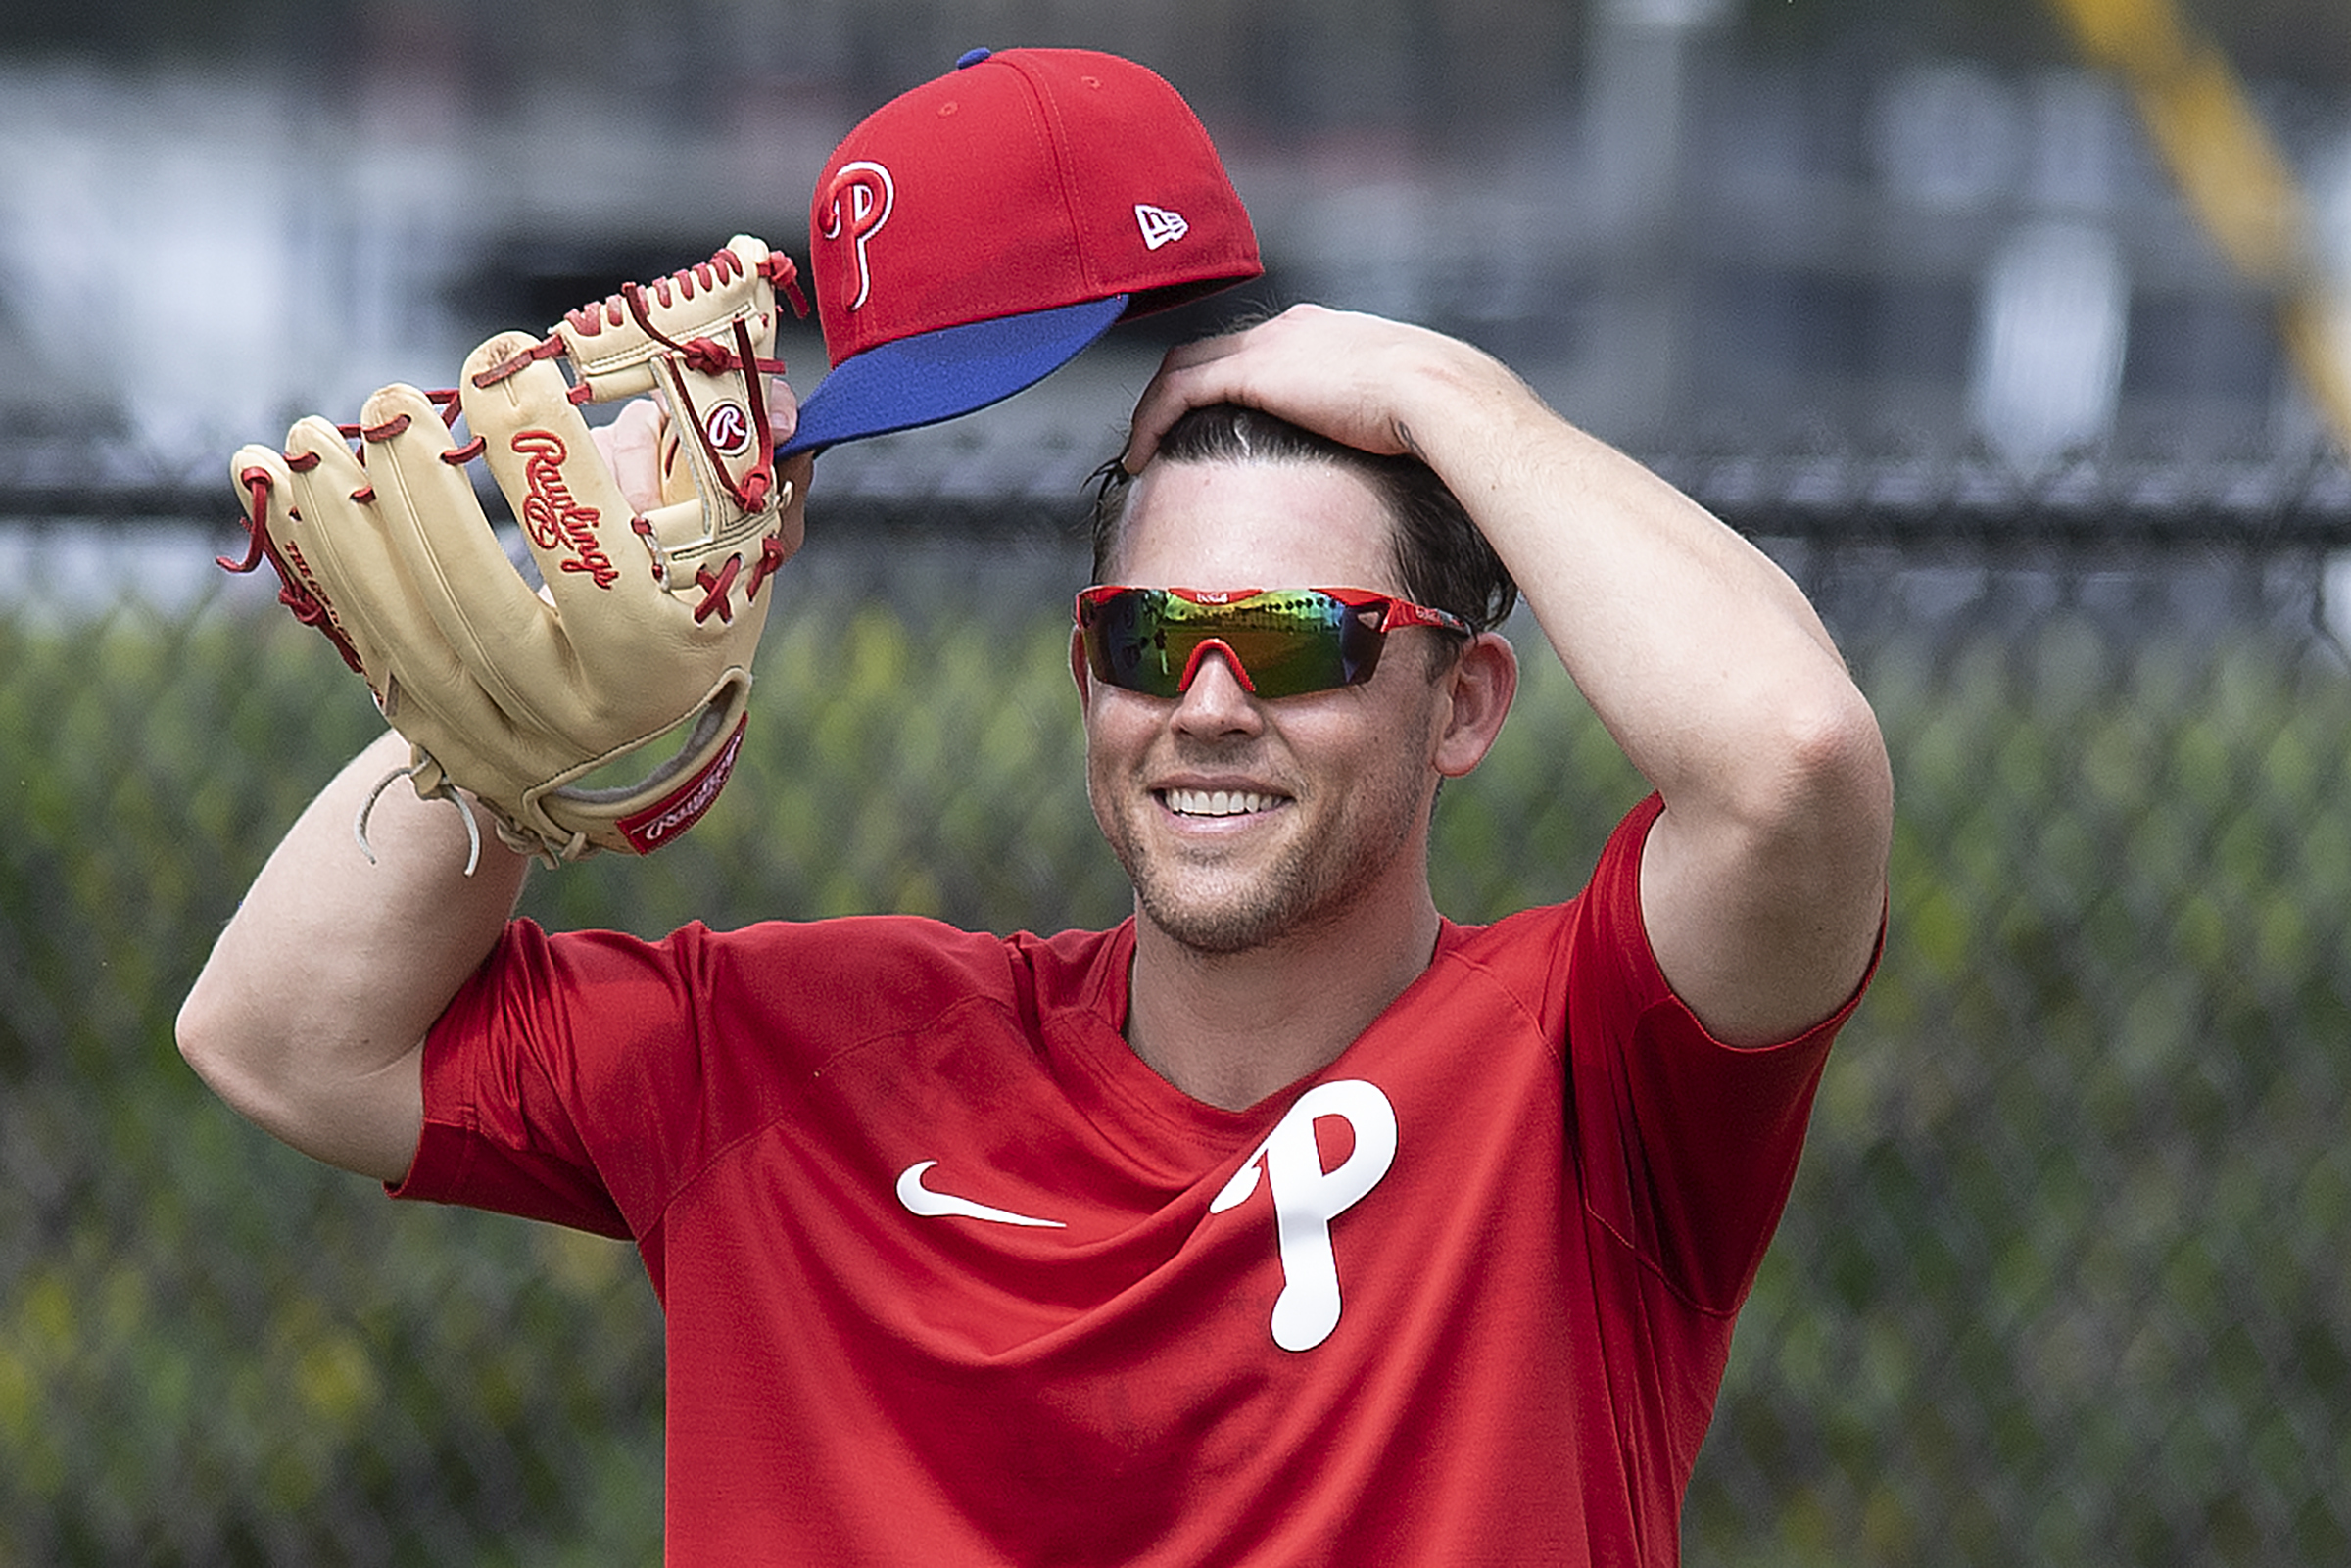 Phillies' Scott Kingery shows off results of his 'different swing